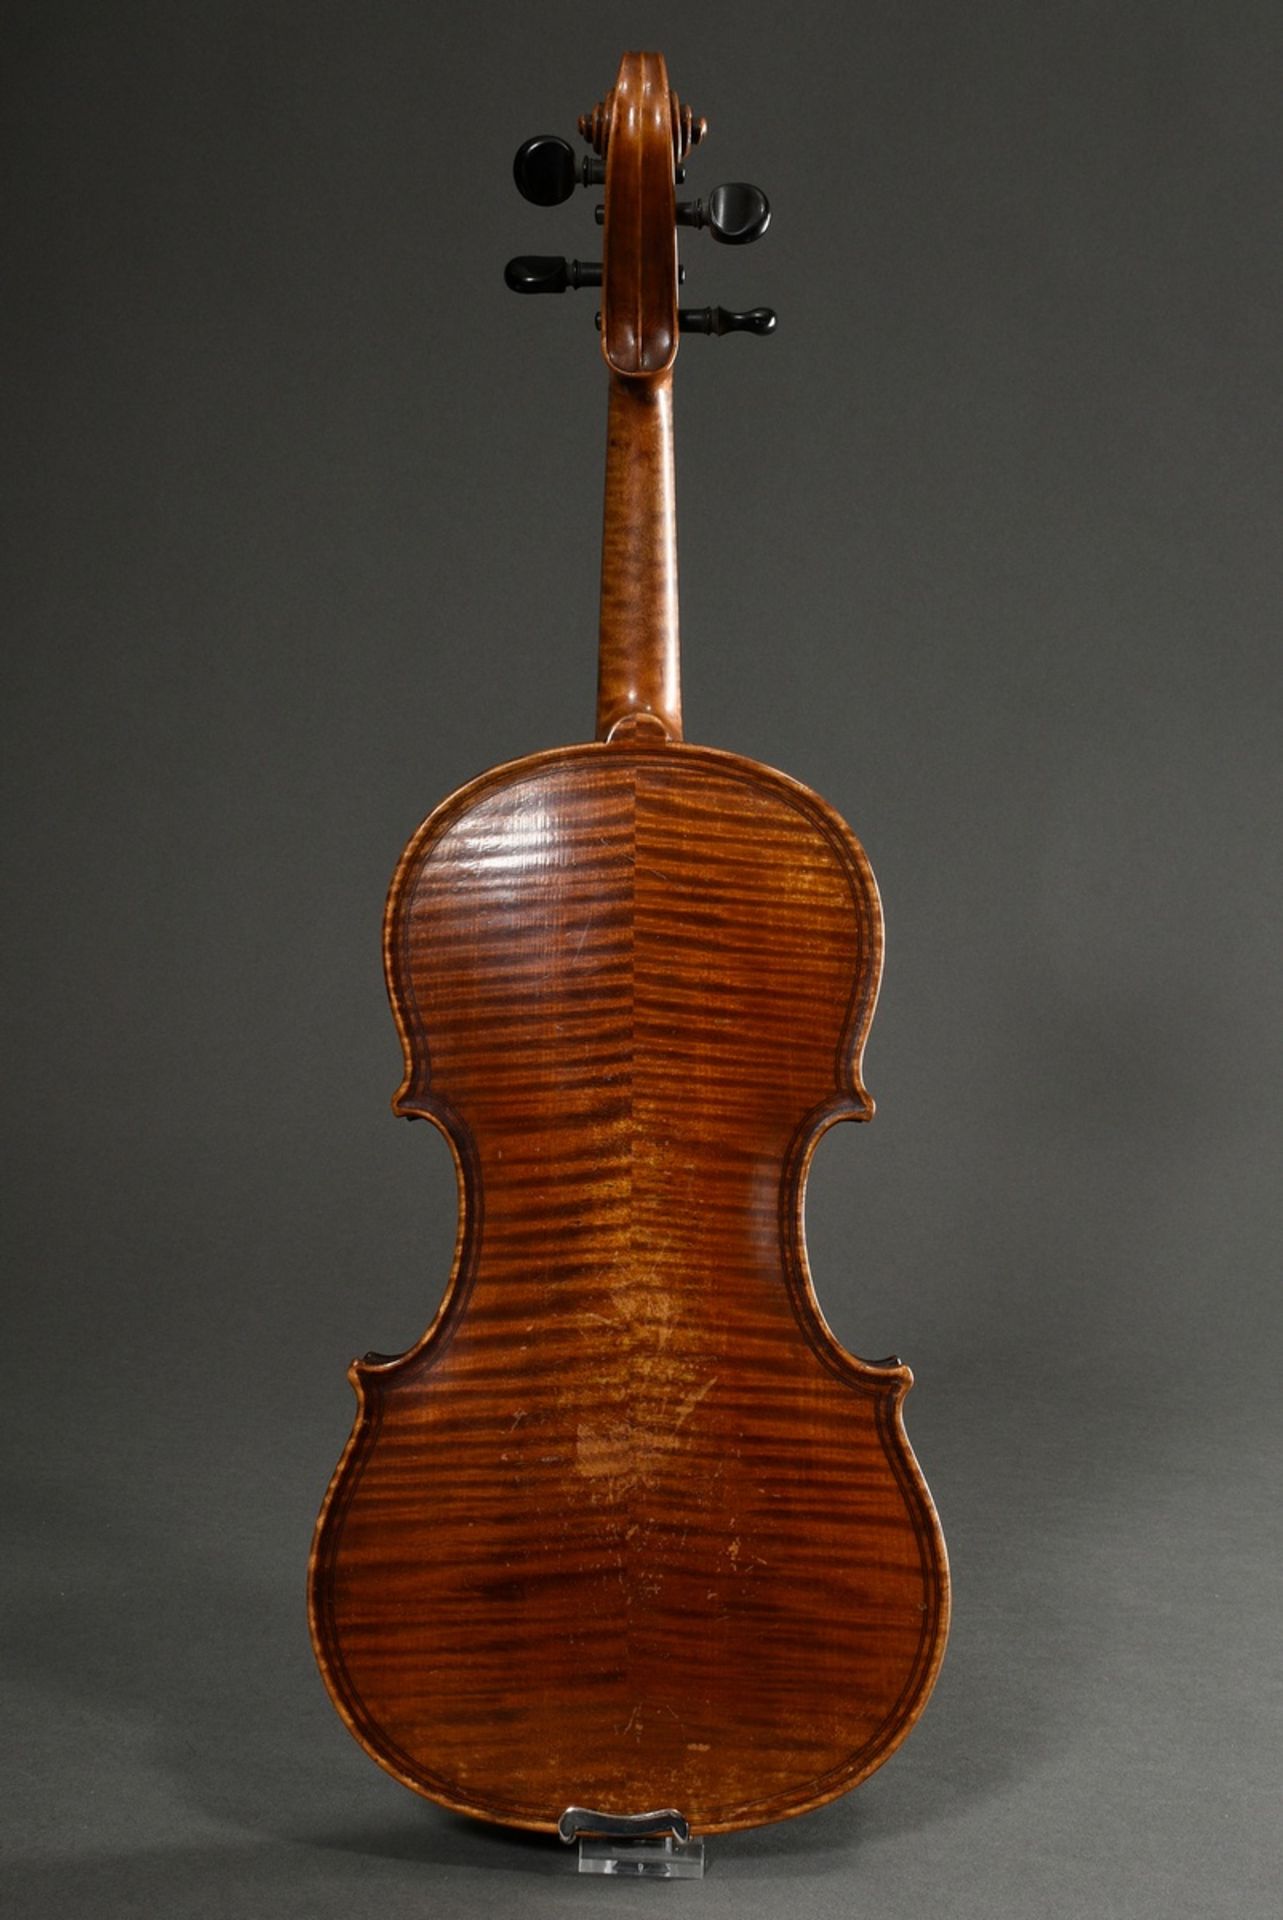 Elegant violin after Maggini, German 19th c., fine-grained spruce top, two-piece beautifully flamed - Image 3 of 16